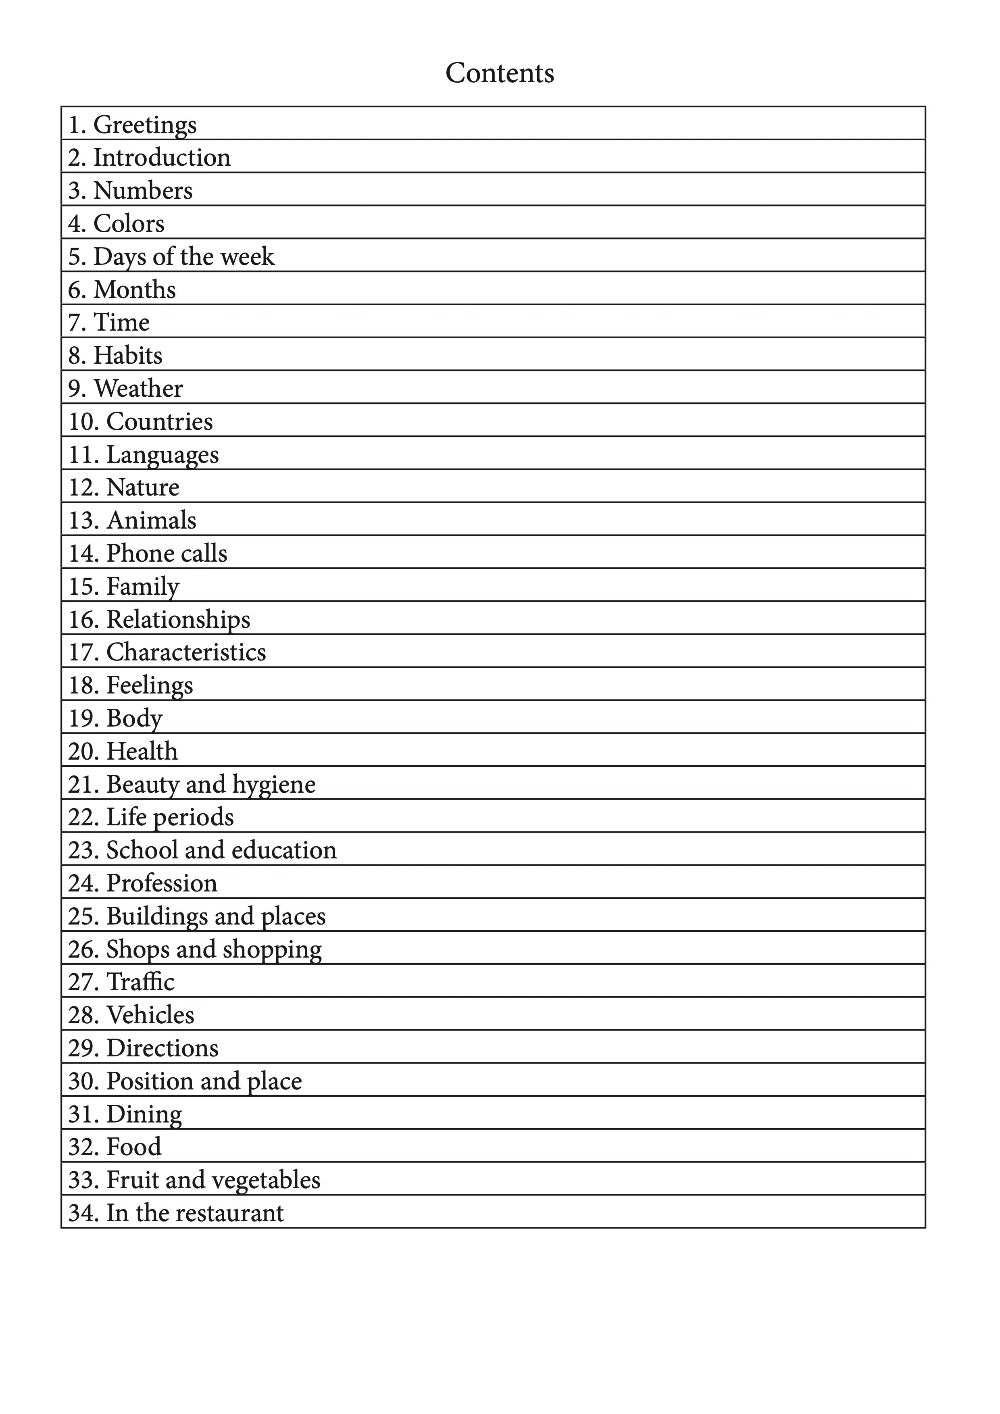 Mixe language learning notebook contents page 1